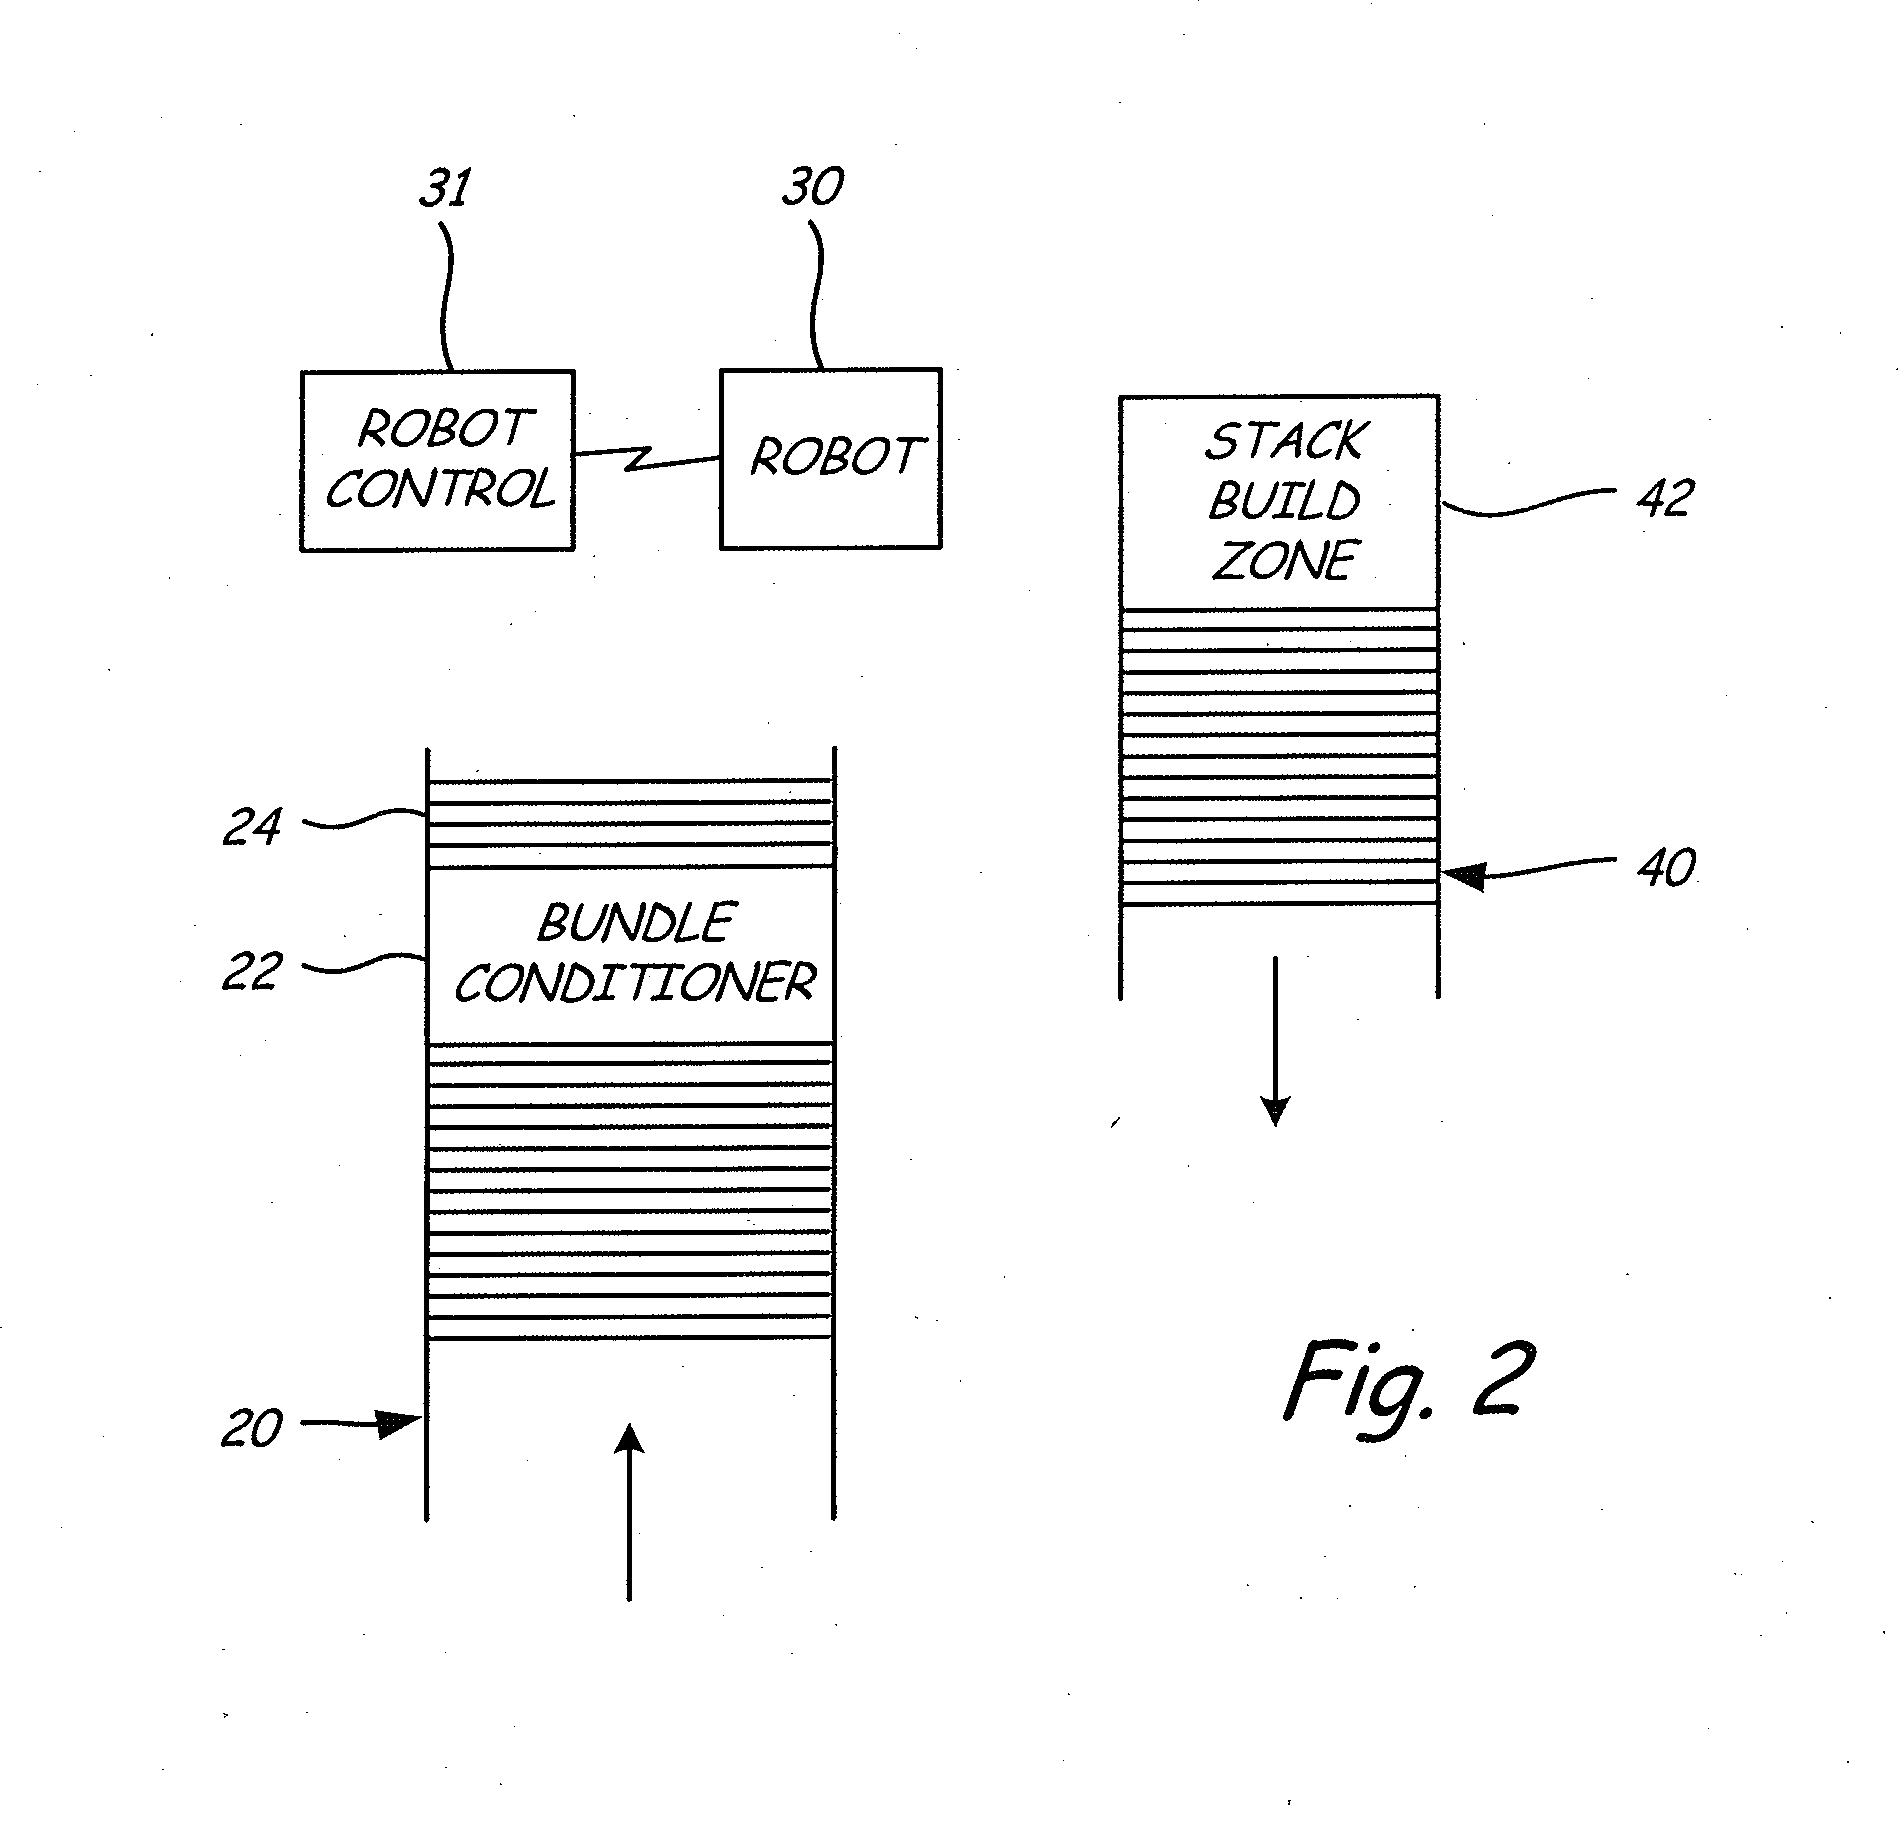 System and methods for forming stacks